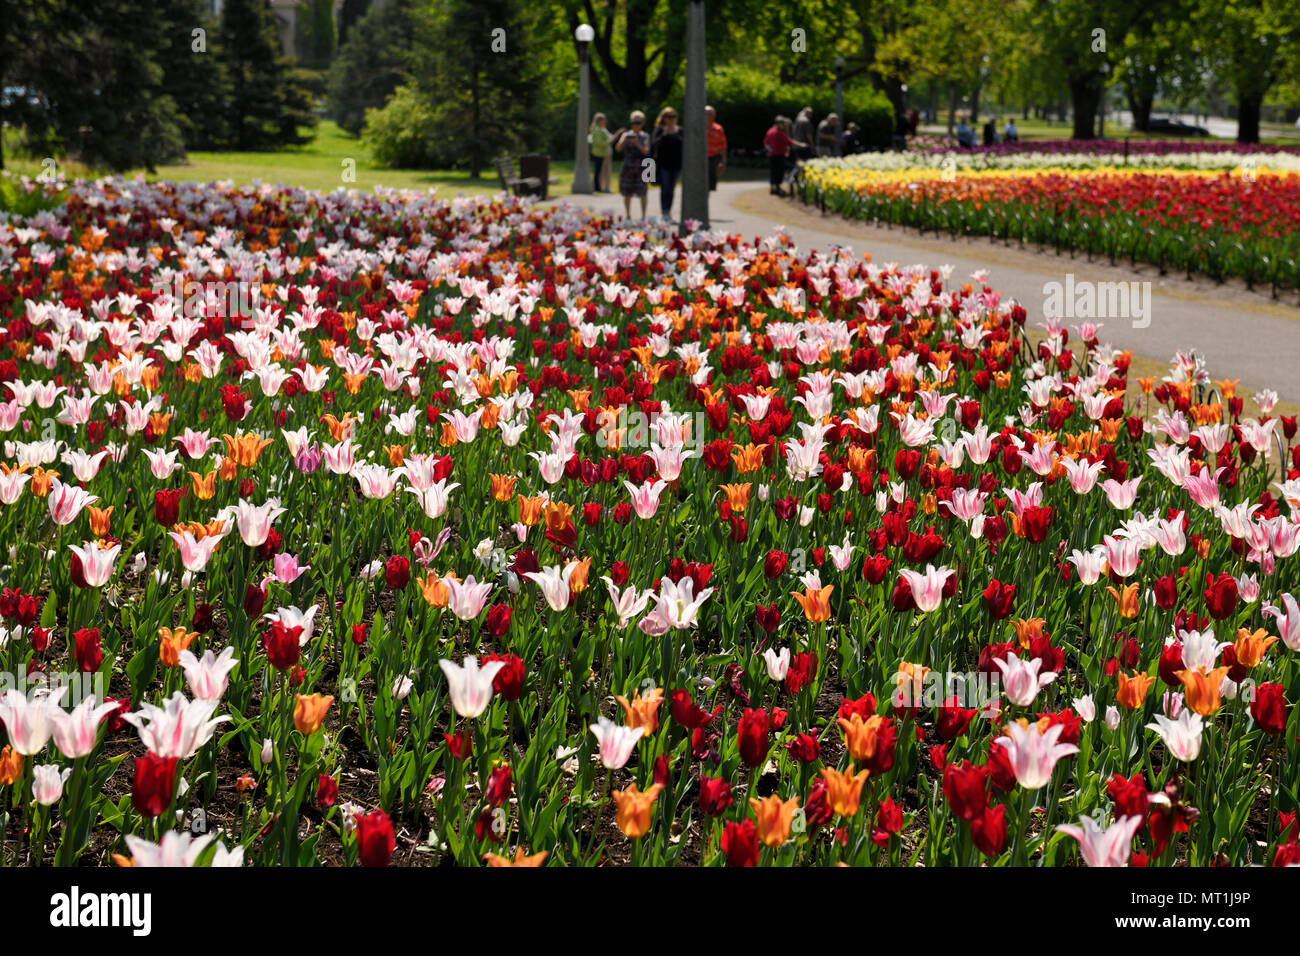 Red Pretty Woman and white striped Marilyn and orange Ballerina tulips at Commissioners Park Canadian Tulip Festival Ottawa Canada Stock Photo